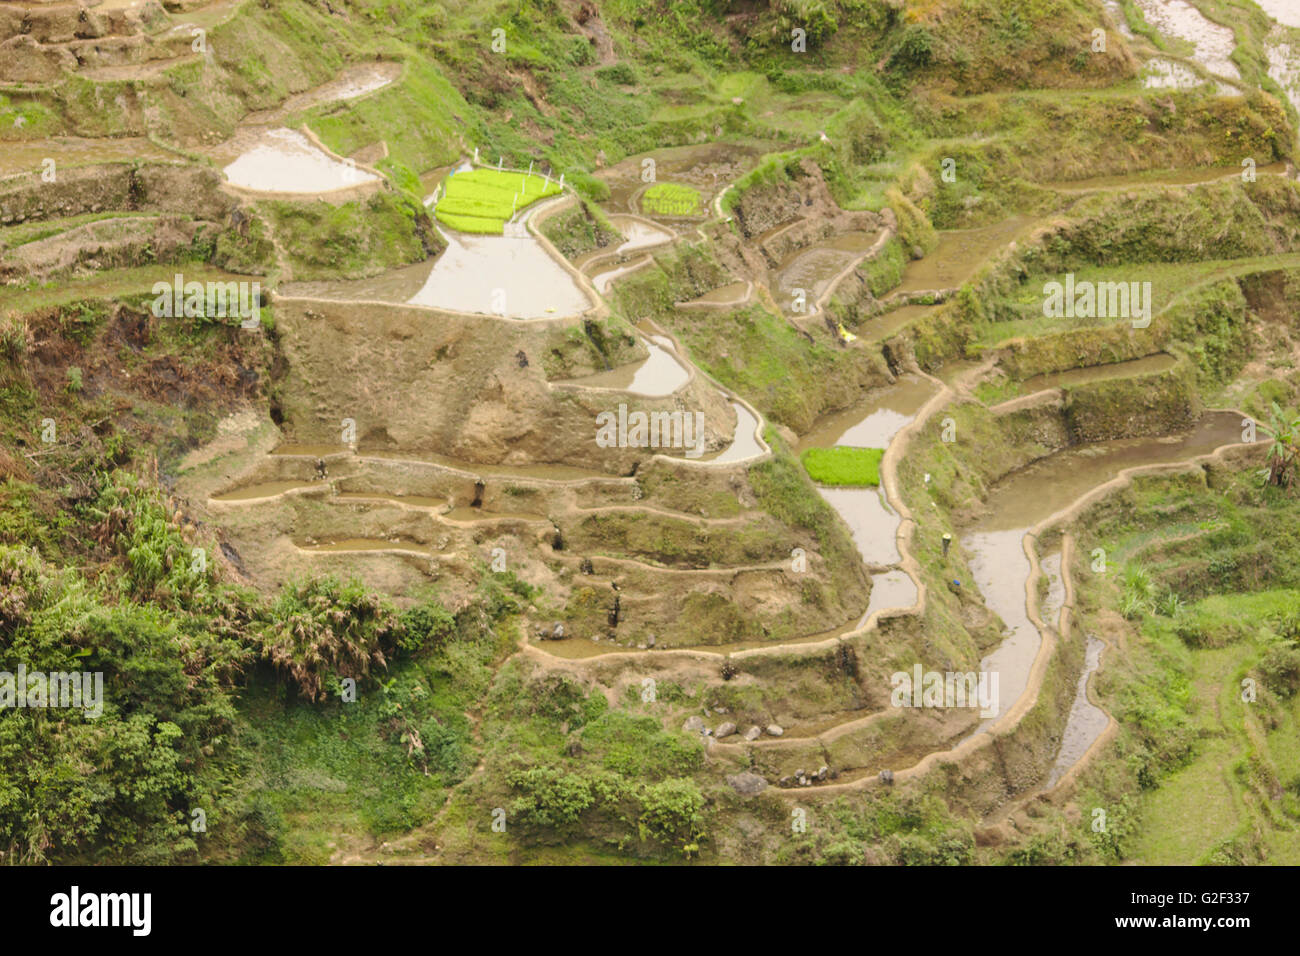 Ifugao rice terraces from Banaue viewpoint in April, northern Luzon, Philippines Stock Photo